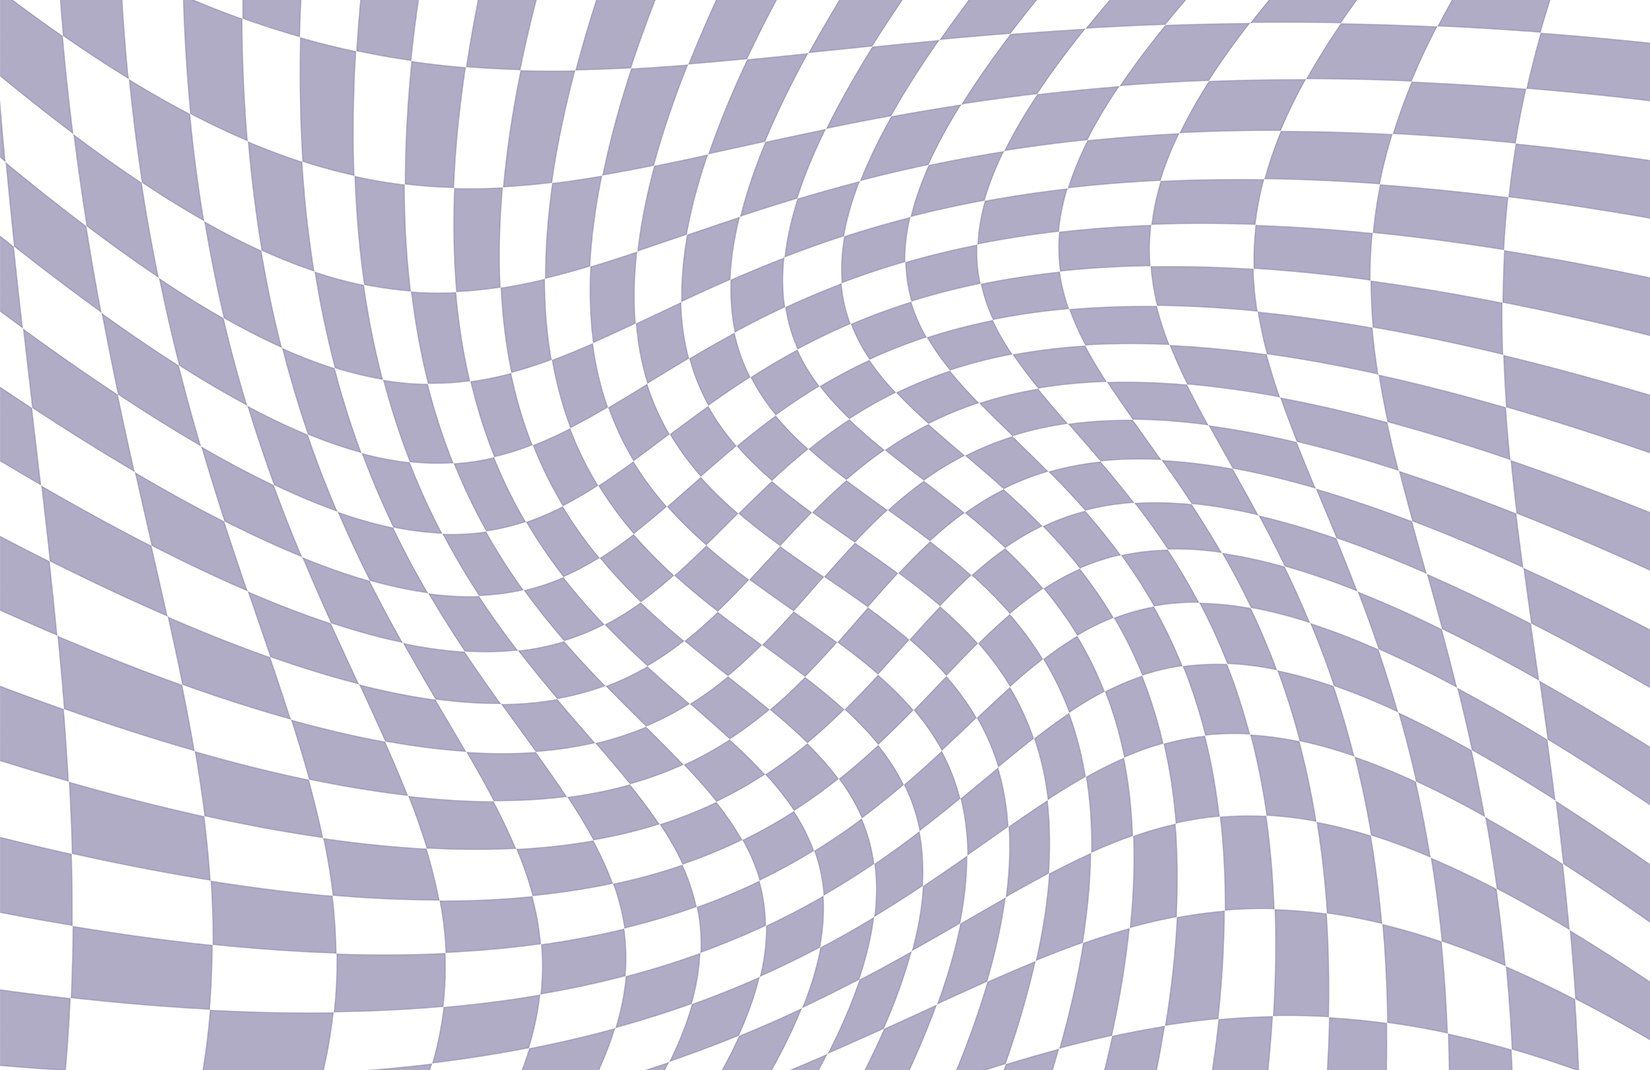 A purple and white checkered pattern - Checkered